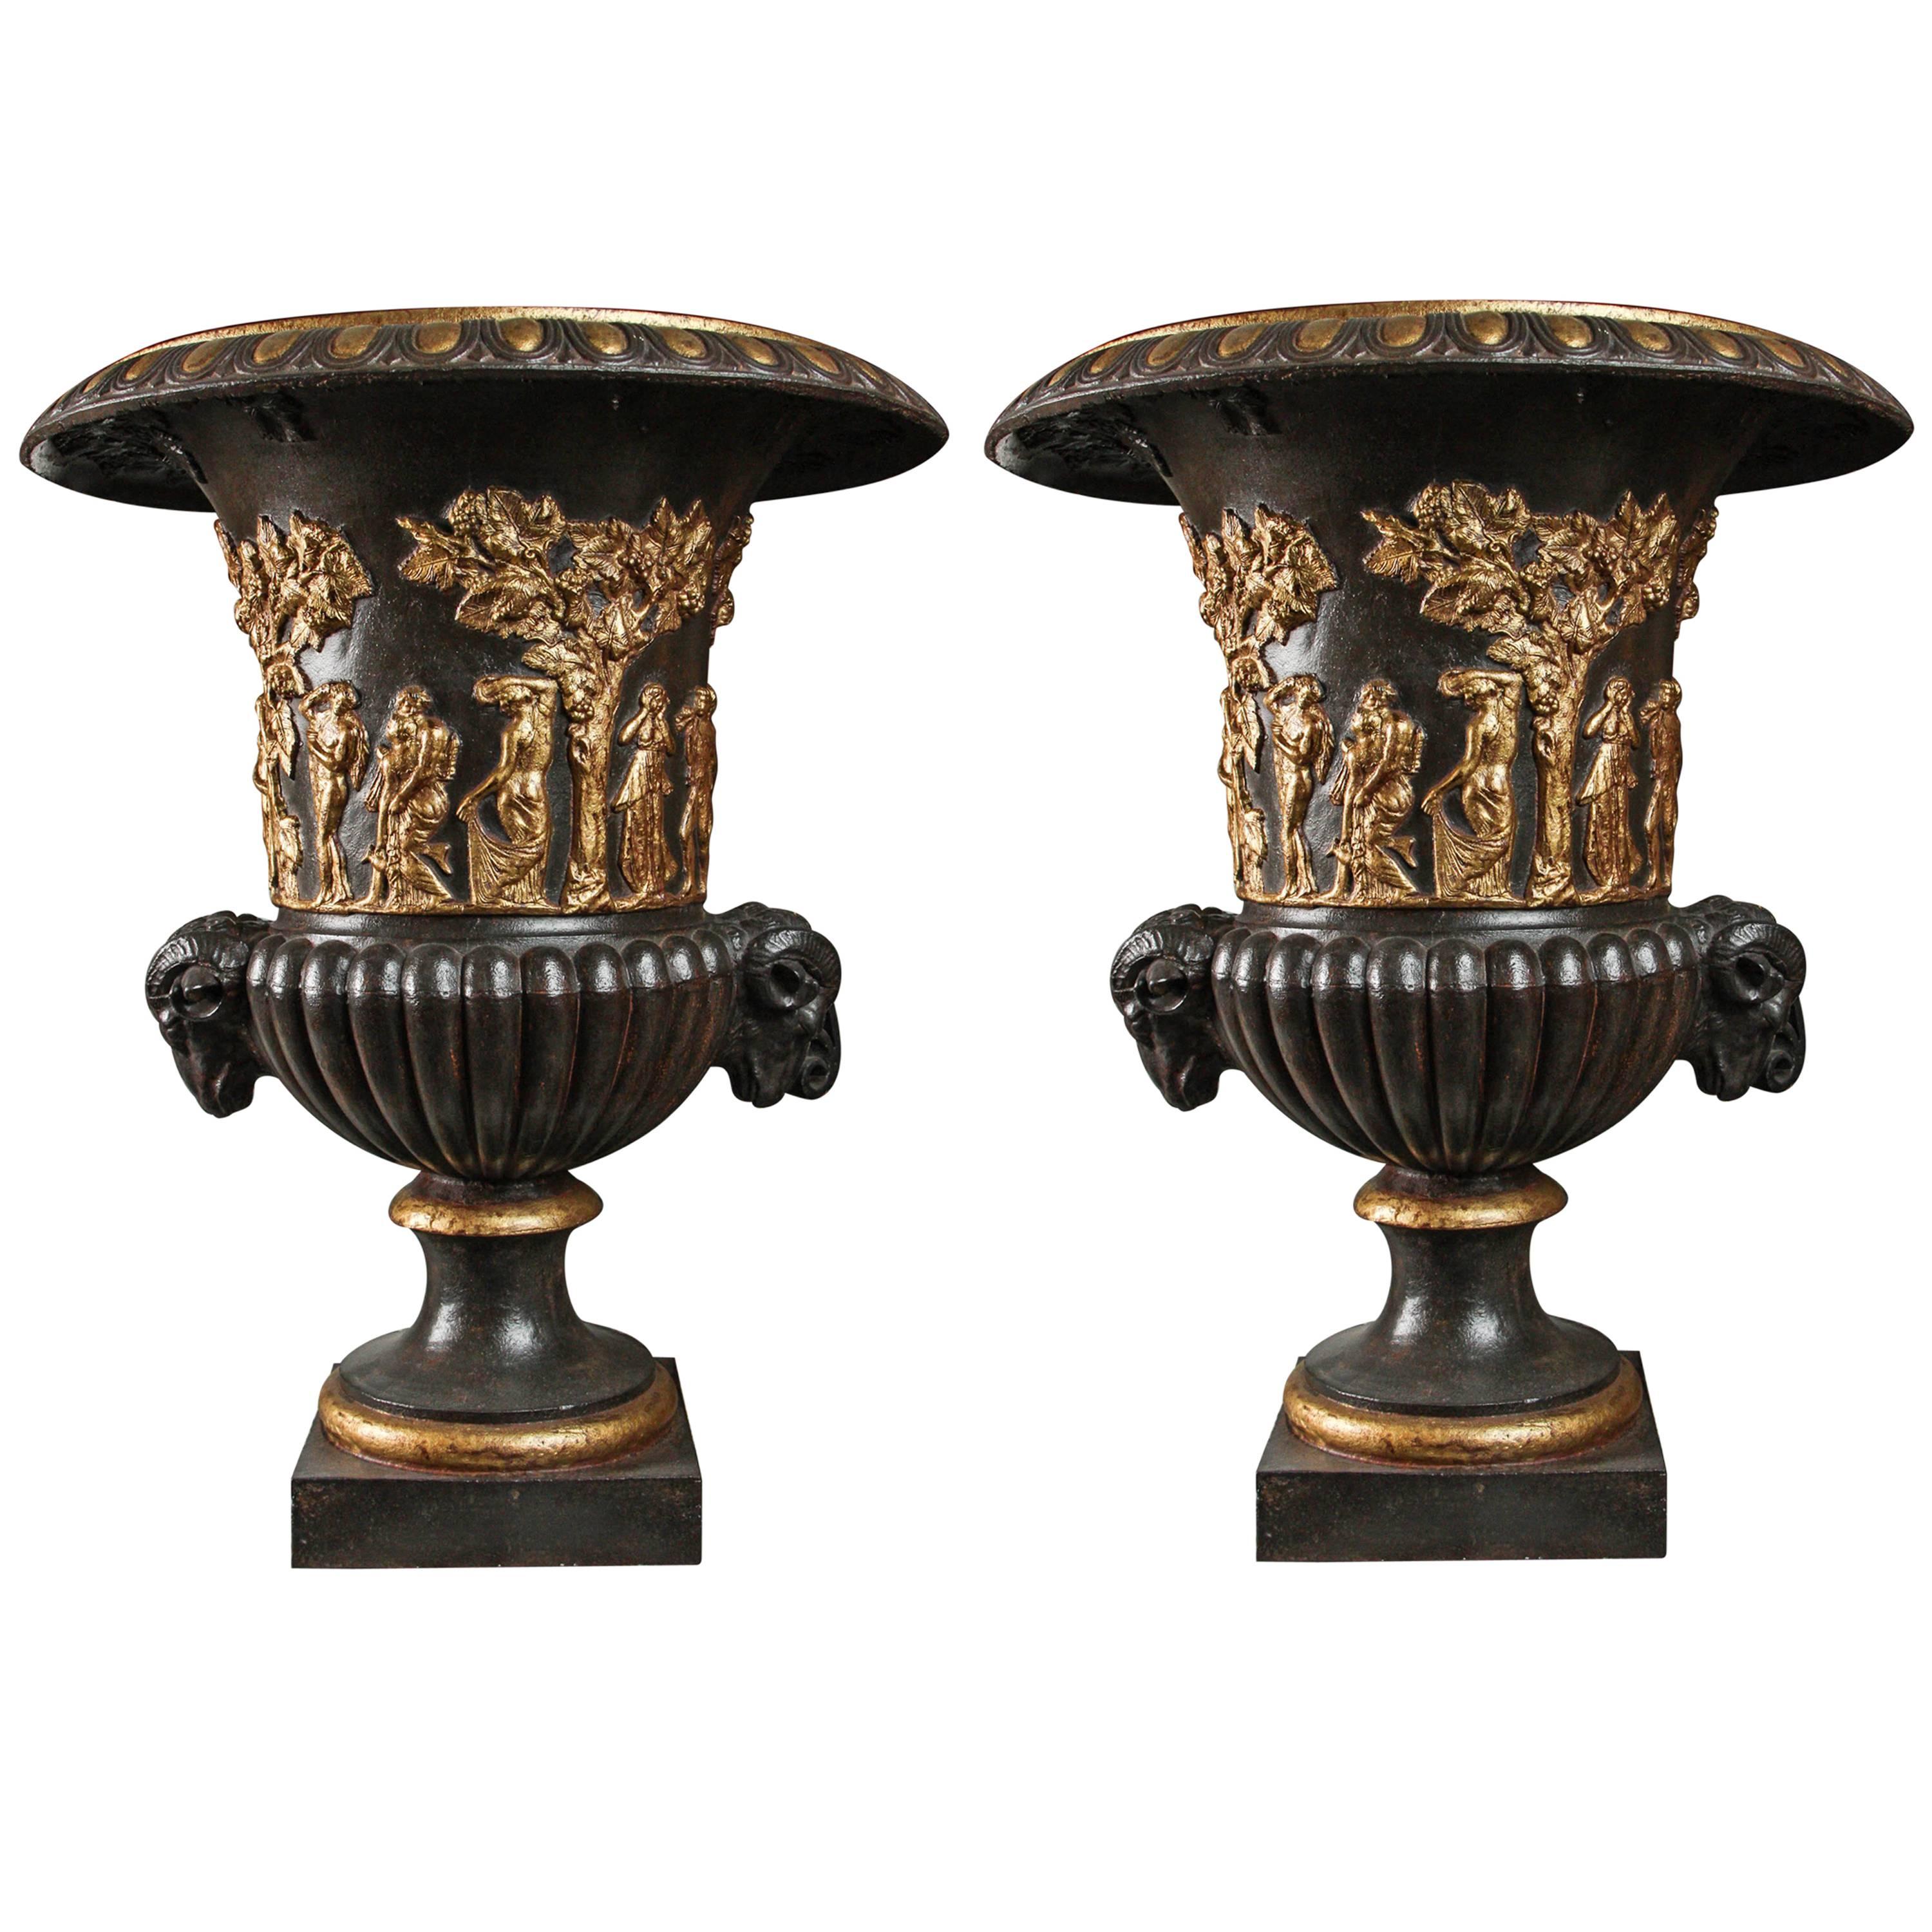 Pair of Early 19th Century French Empire Campaign Urns